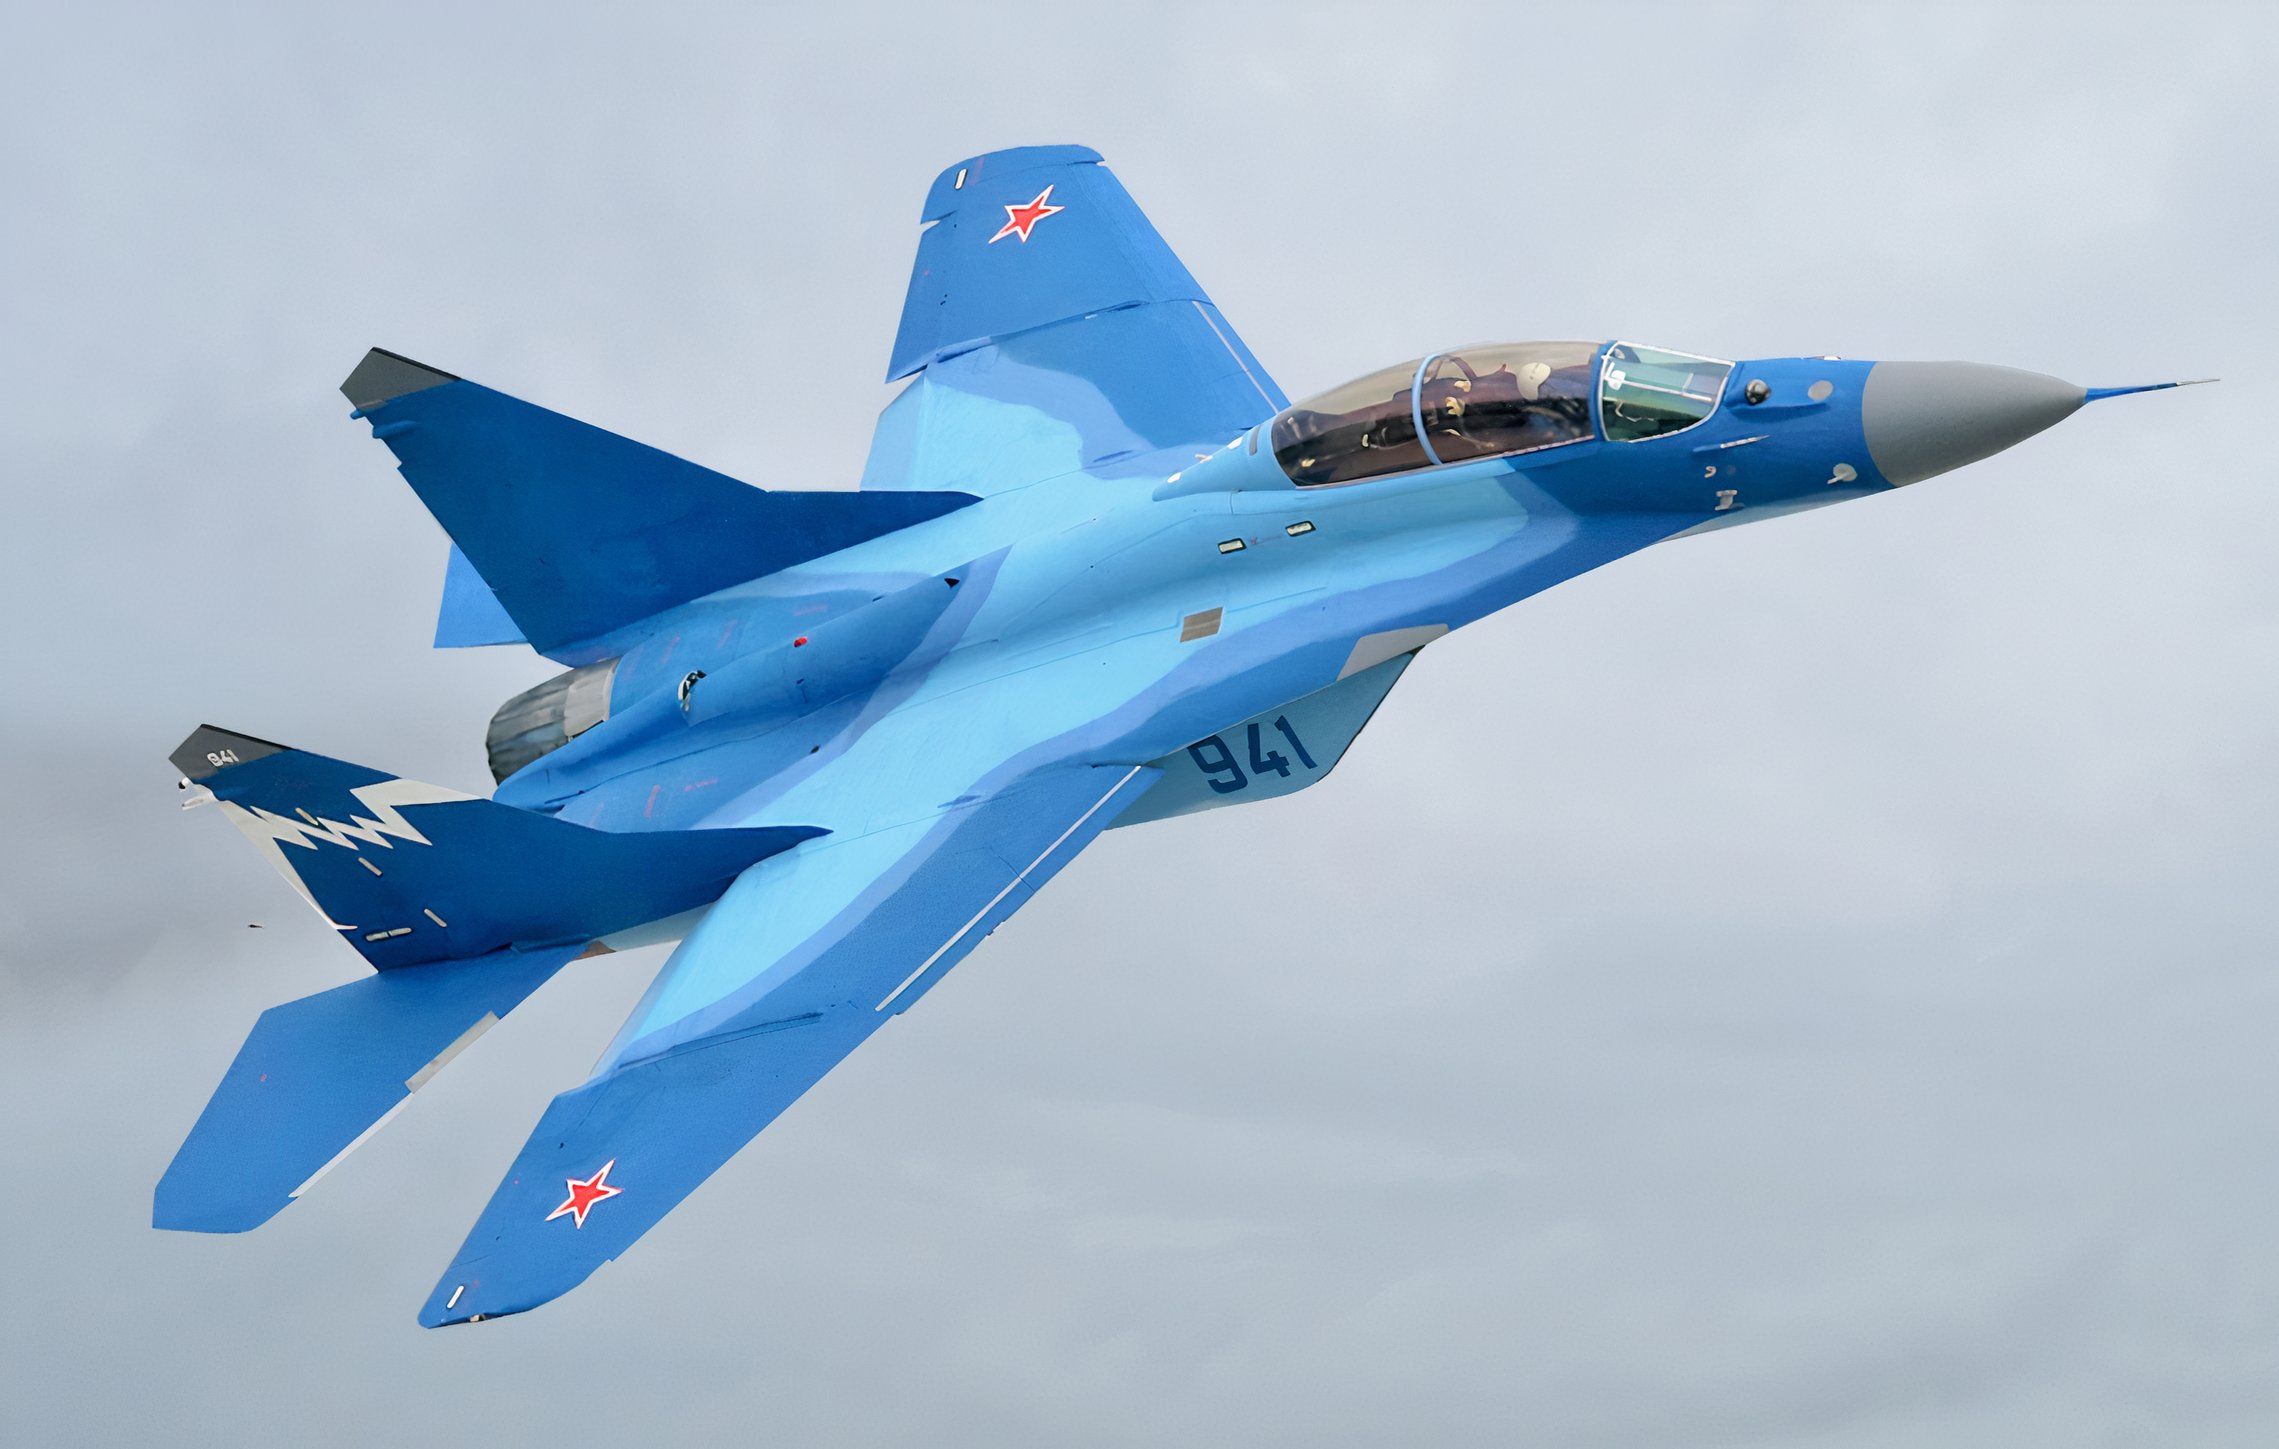 MiG-29K at Moscow air show in 2007